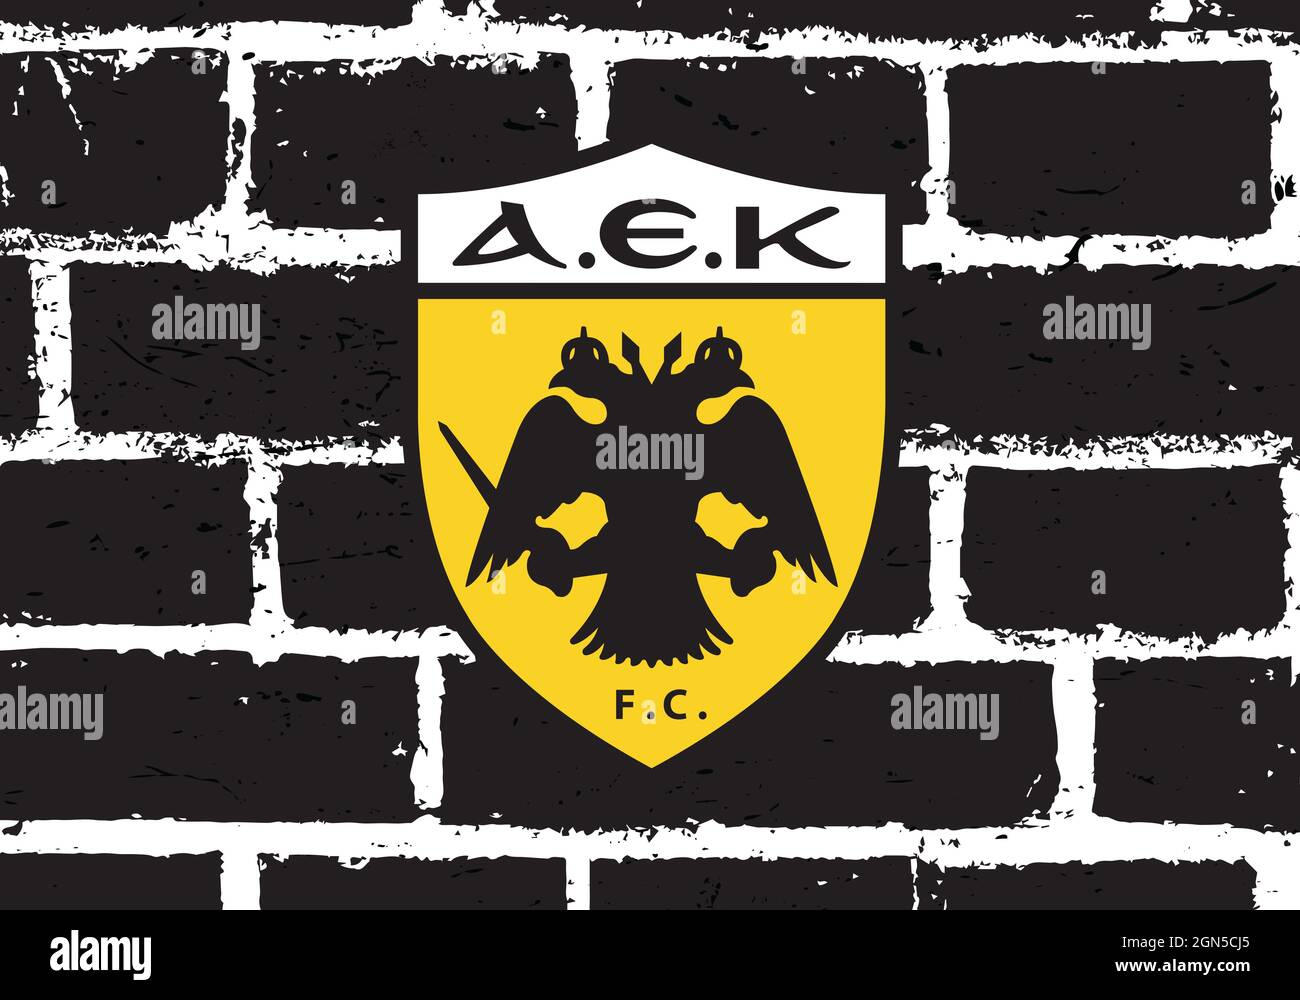 Aek High Resolution Stock Photography and Images - Alamy